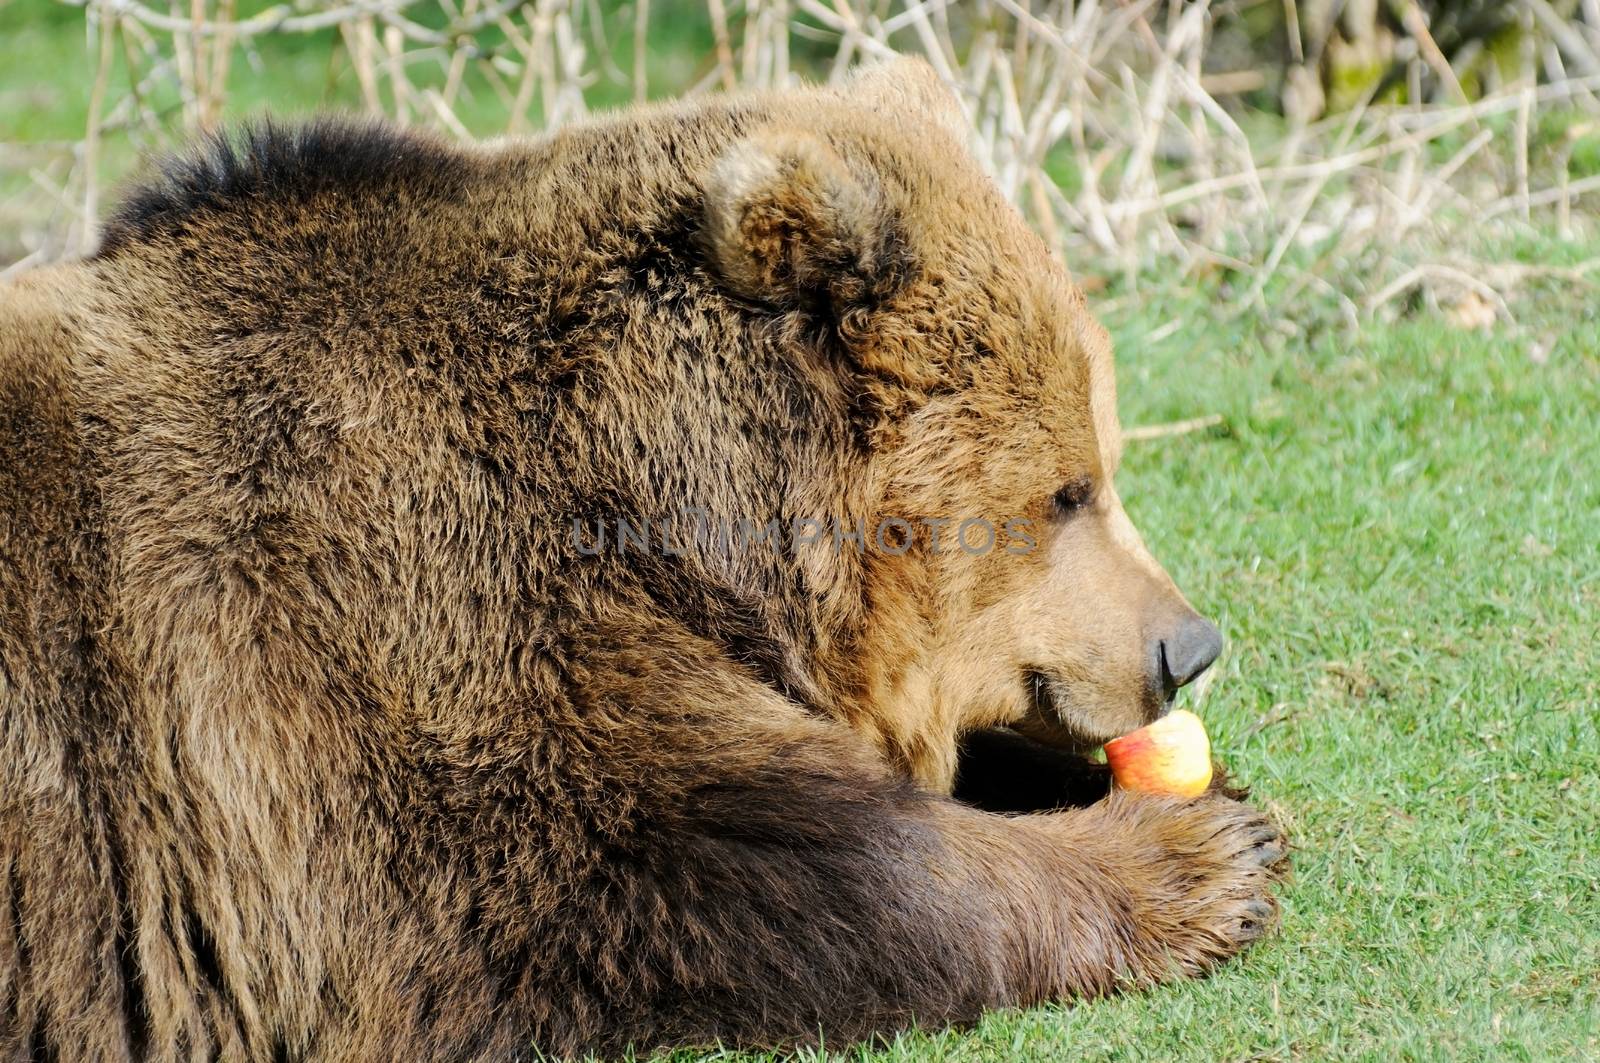 Closeup profile of hungry brown bear eating an apple